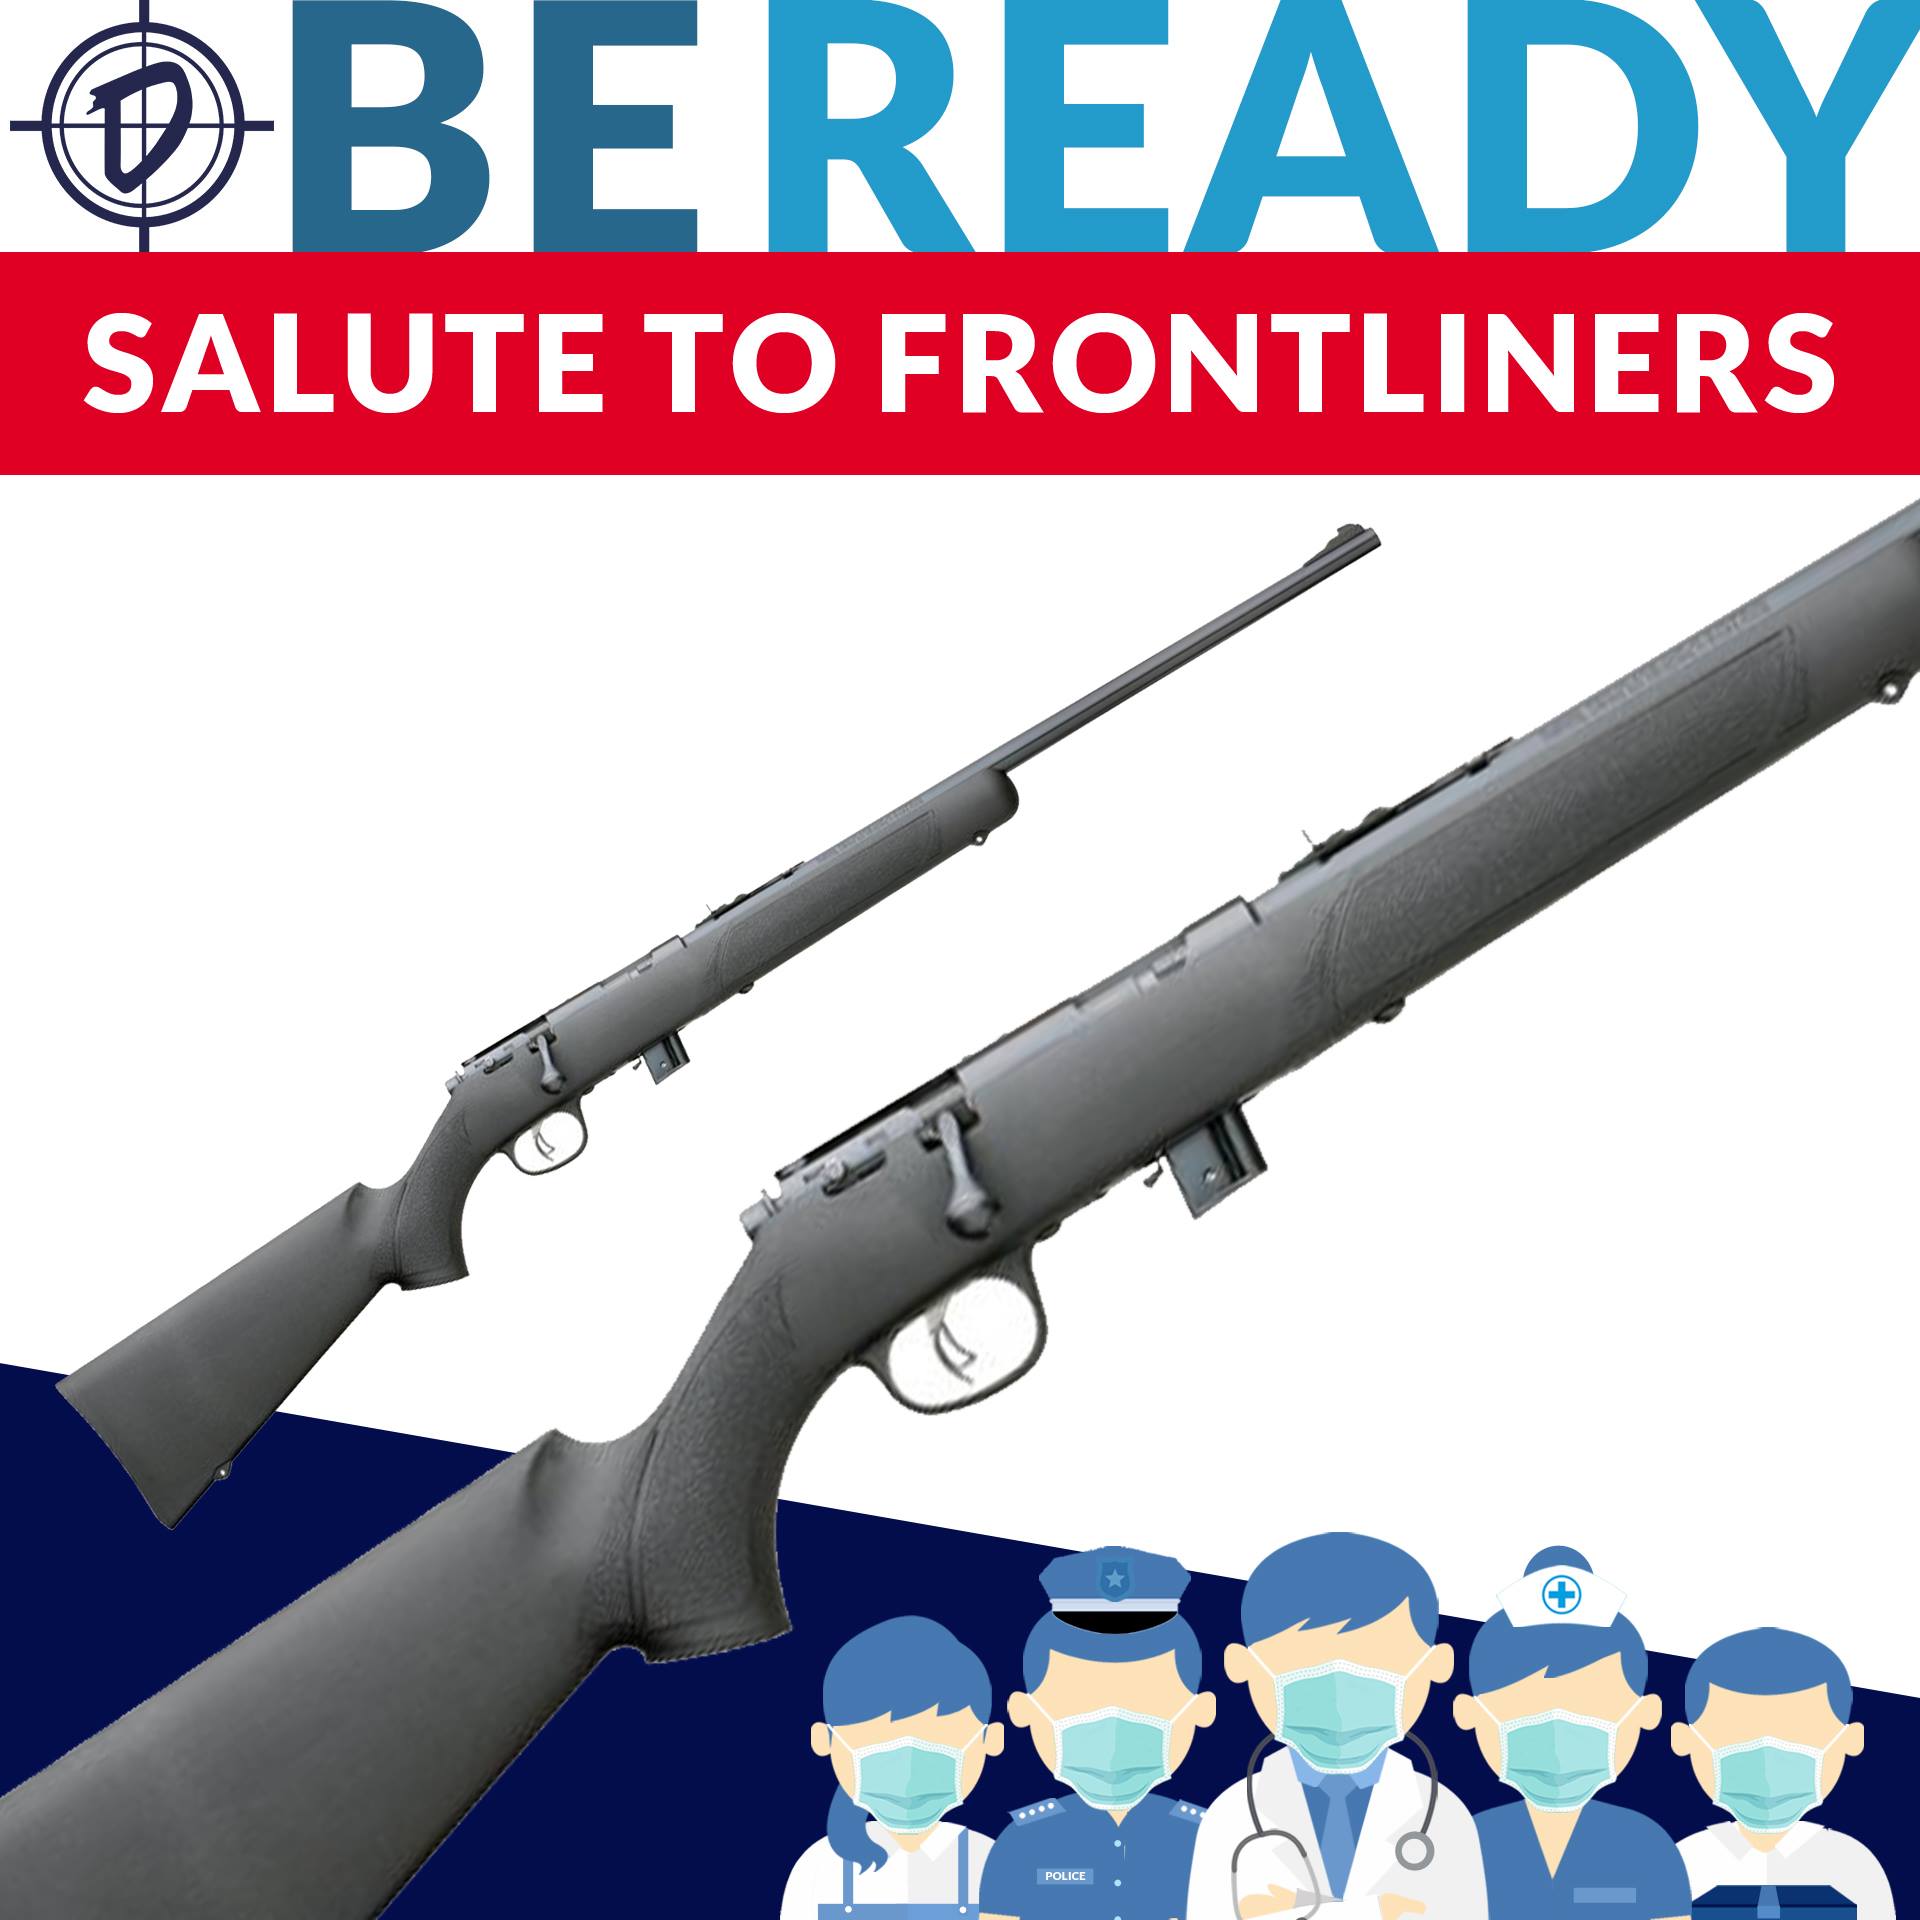 P.B.Dionisio & Co.'s Salute to Frontliners Promo Sale Marlin 22lr